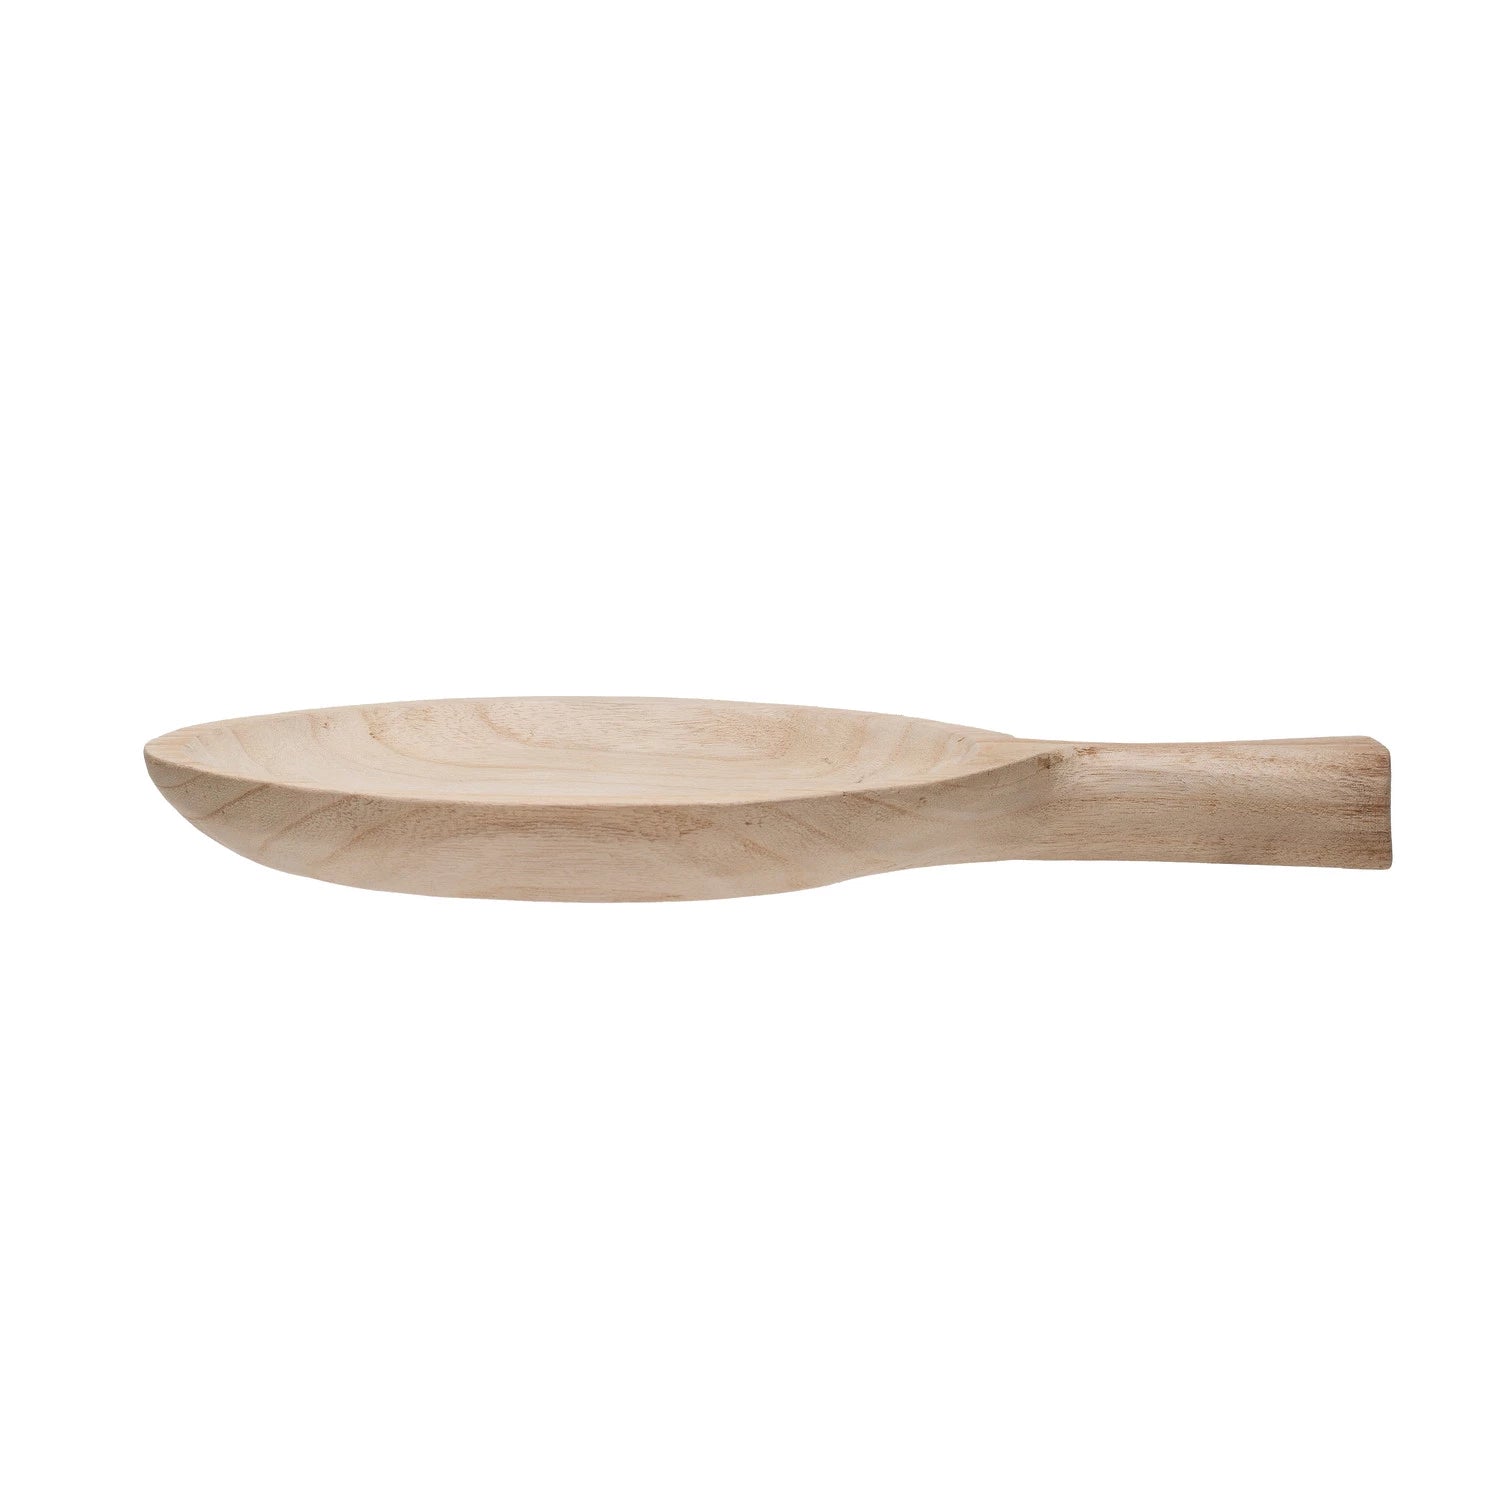 A Bloomingville Paulownia Wood Tray with Handle isolated on a white background, viewed from a side angle, showing the smooth, curved bowl and the flat handle, reminiscent of artisanal crafts found in Scottsdale Arizona.